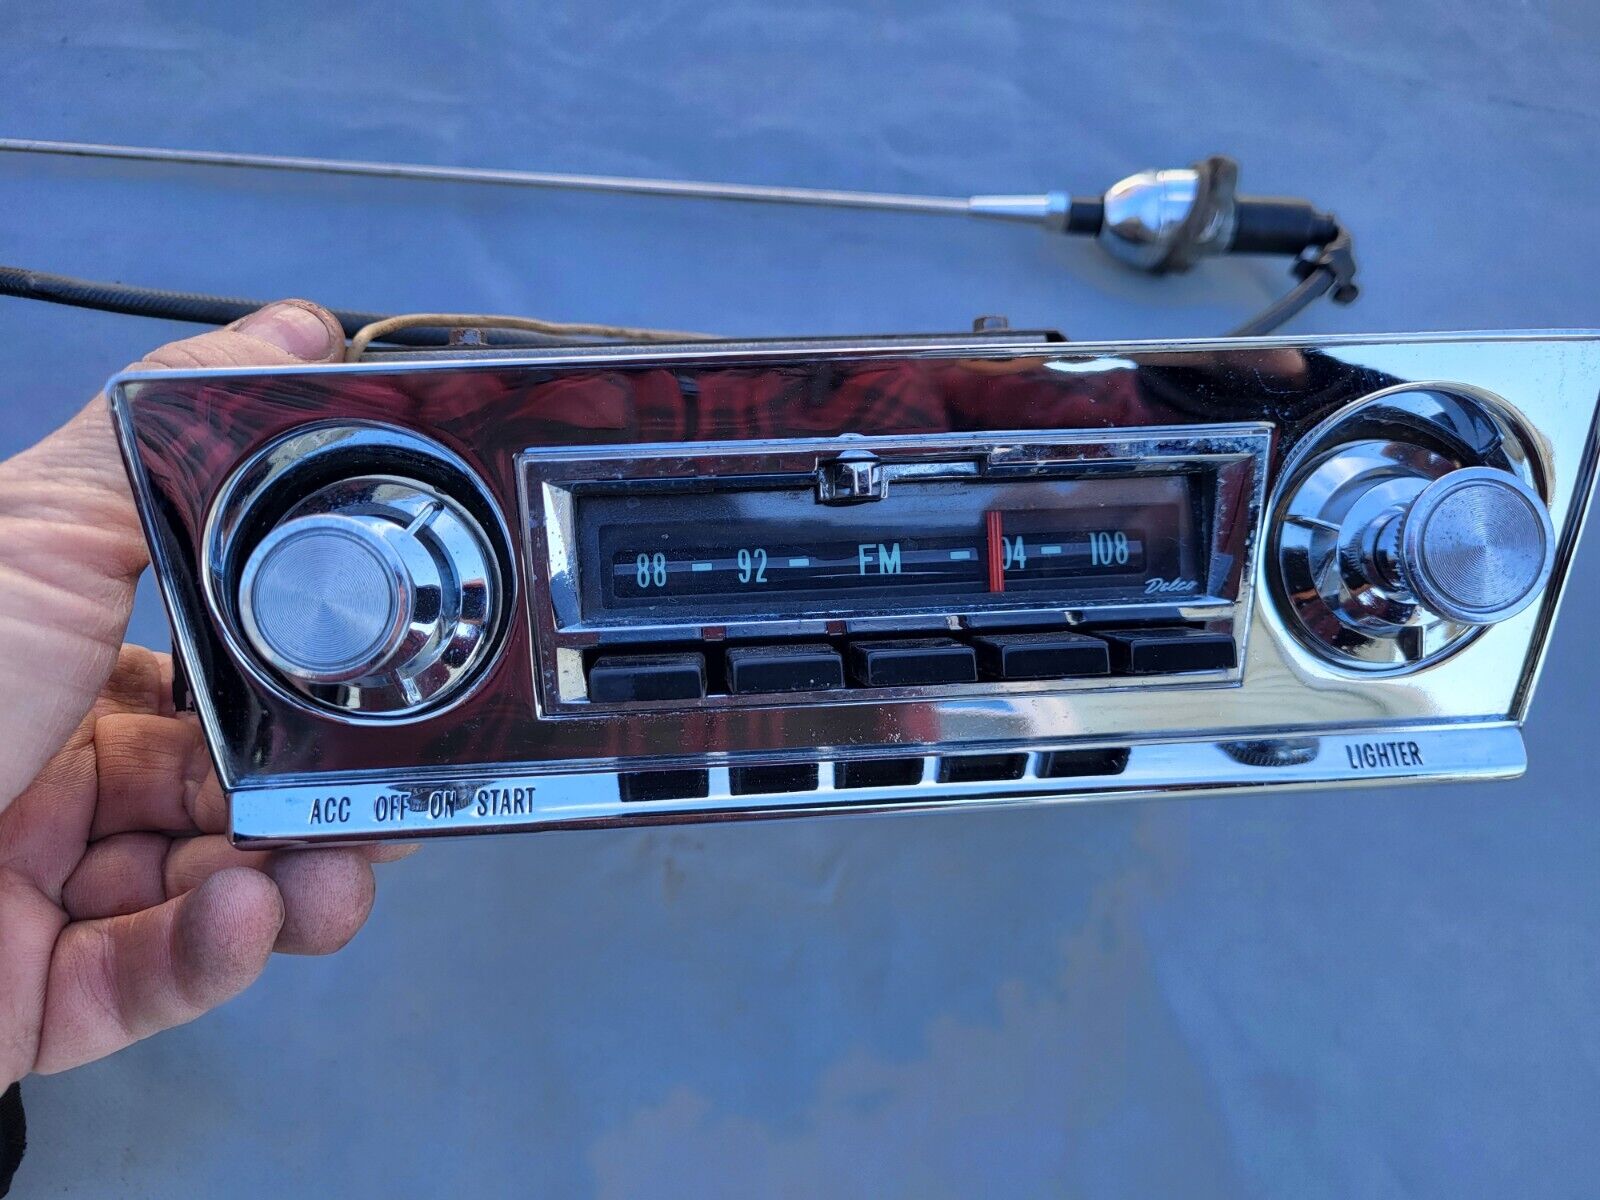 1965 1966 Chevrolet Corvair Factory AM-FM Radio 986118 with speaker and antenna